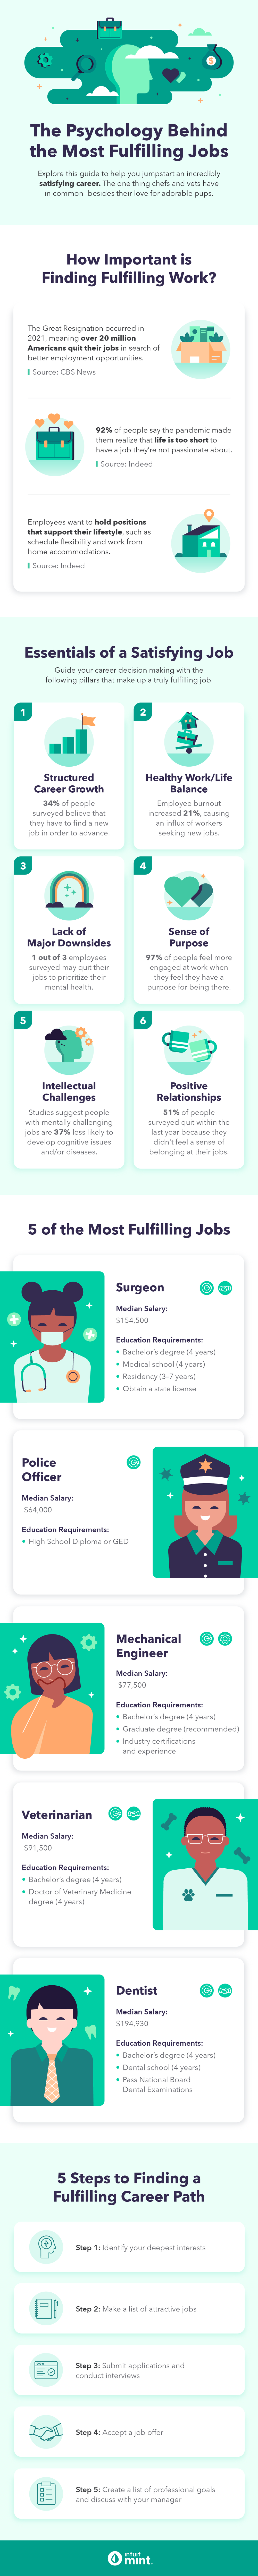 An infographic describes the psychology behind the most fulfilling jobs.